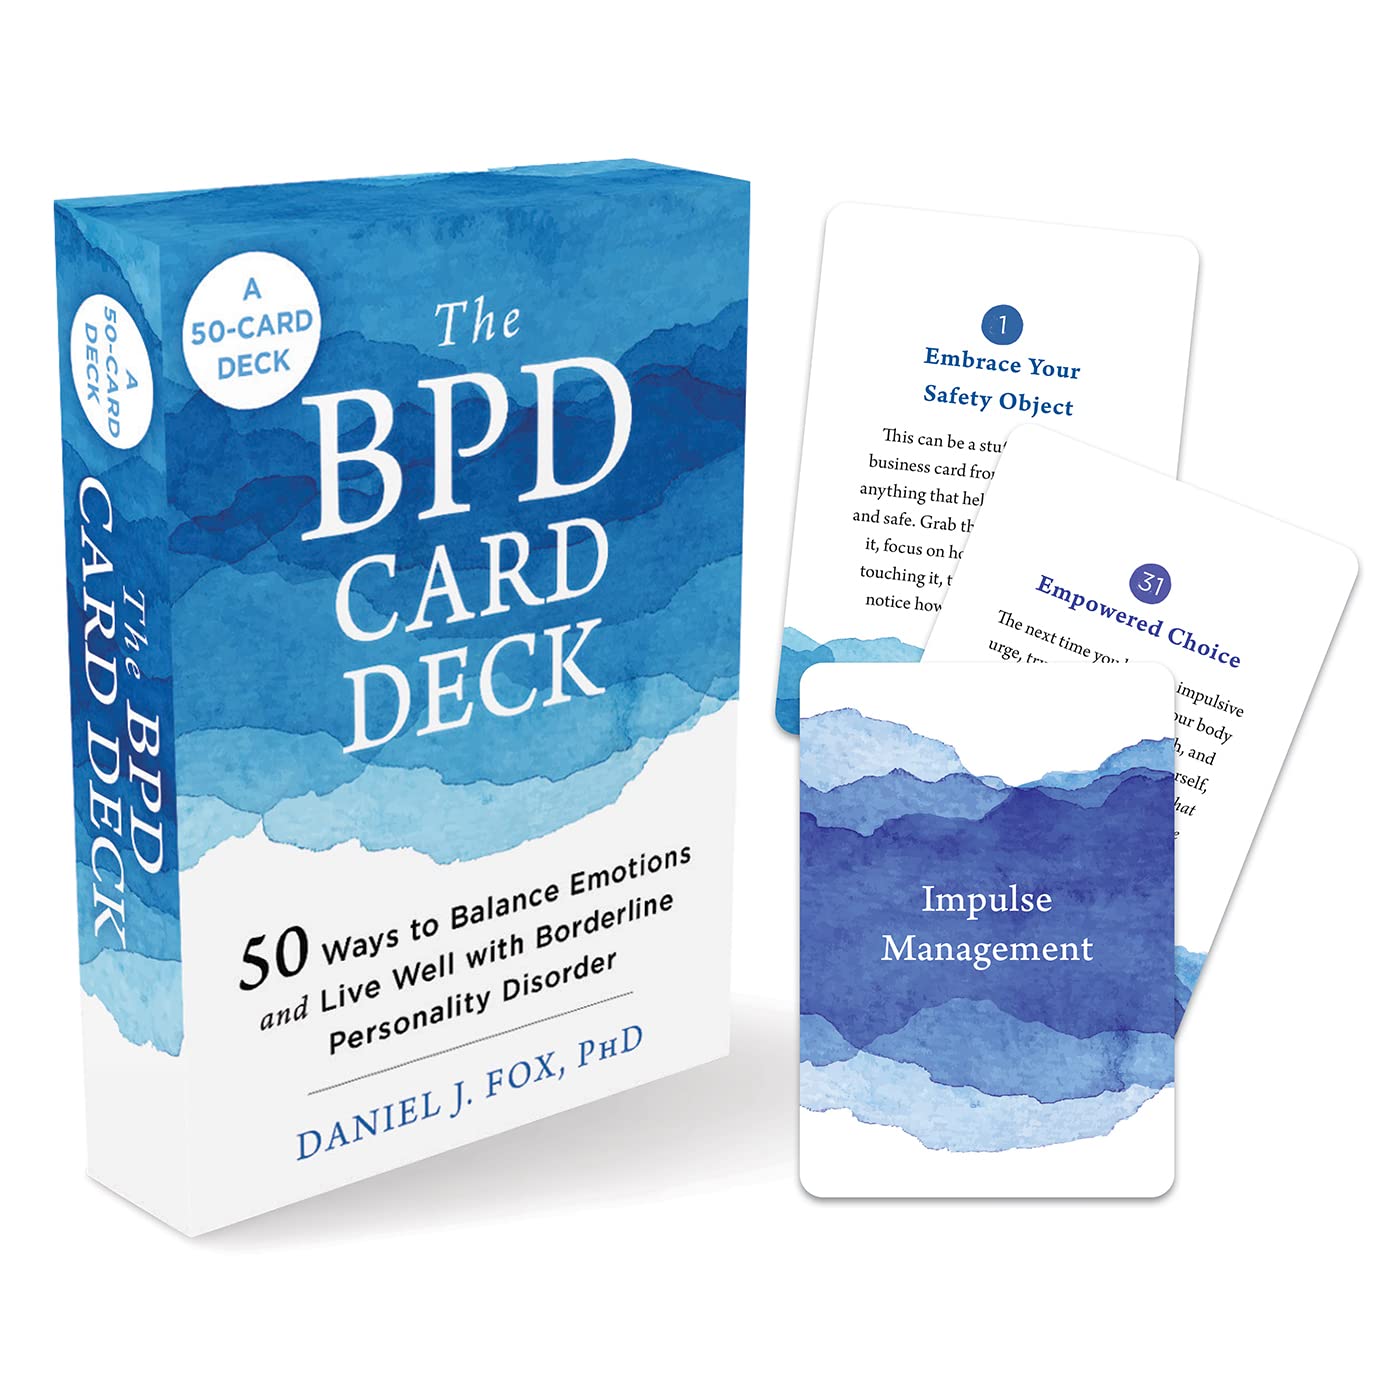 bpd card deck, 50 ways to balance emotions and live well with bpd